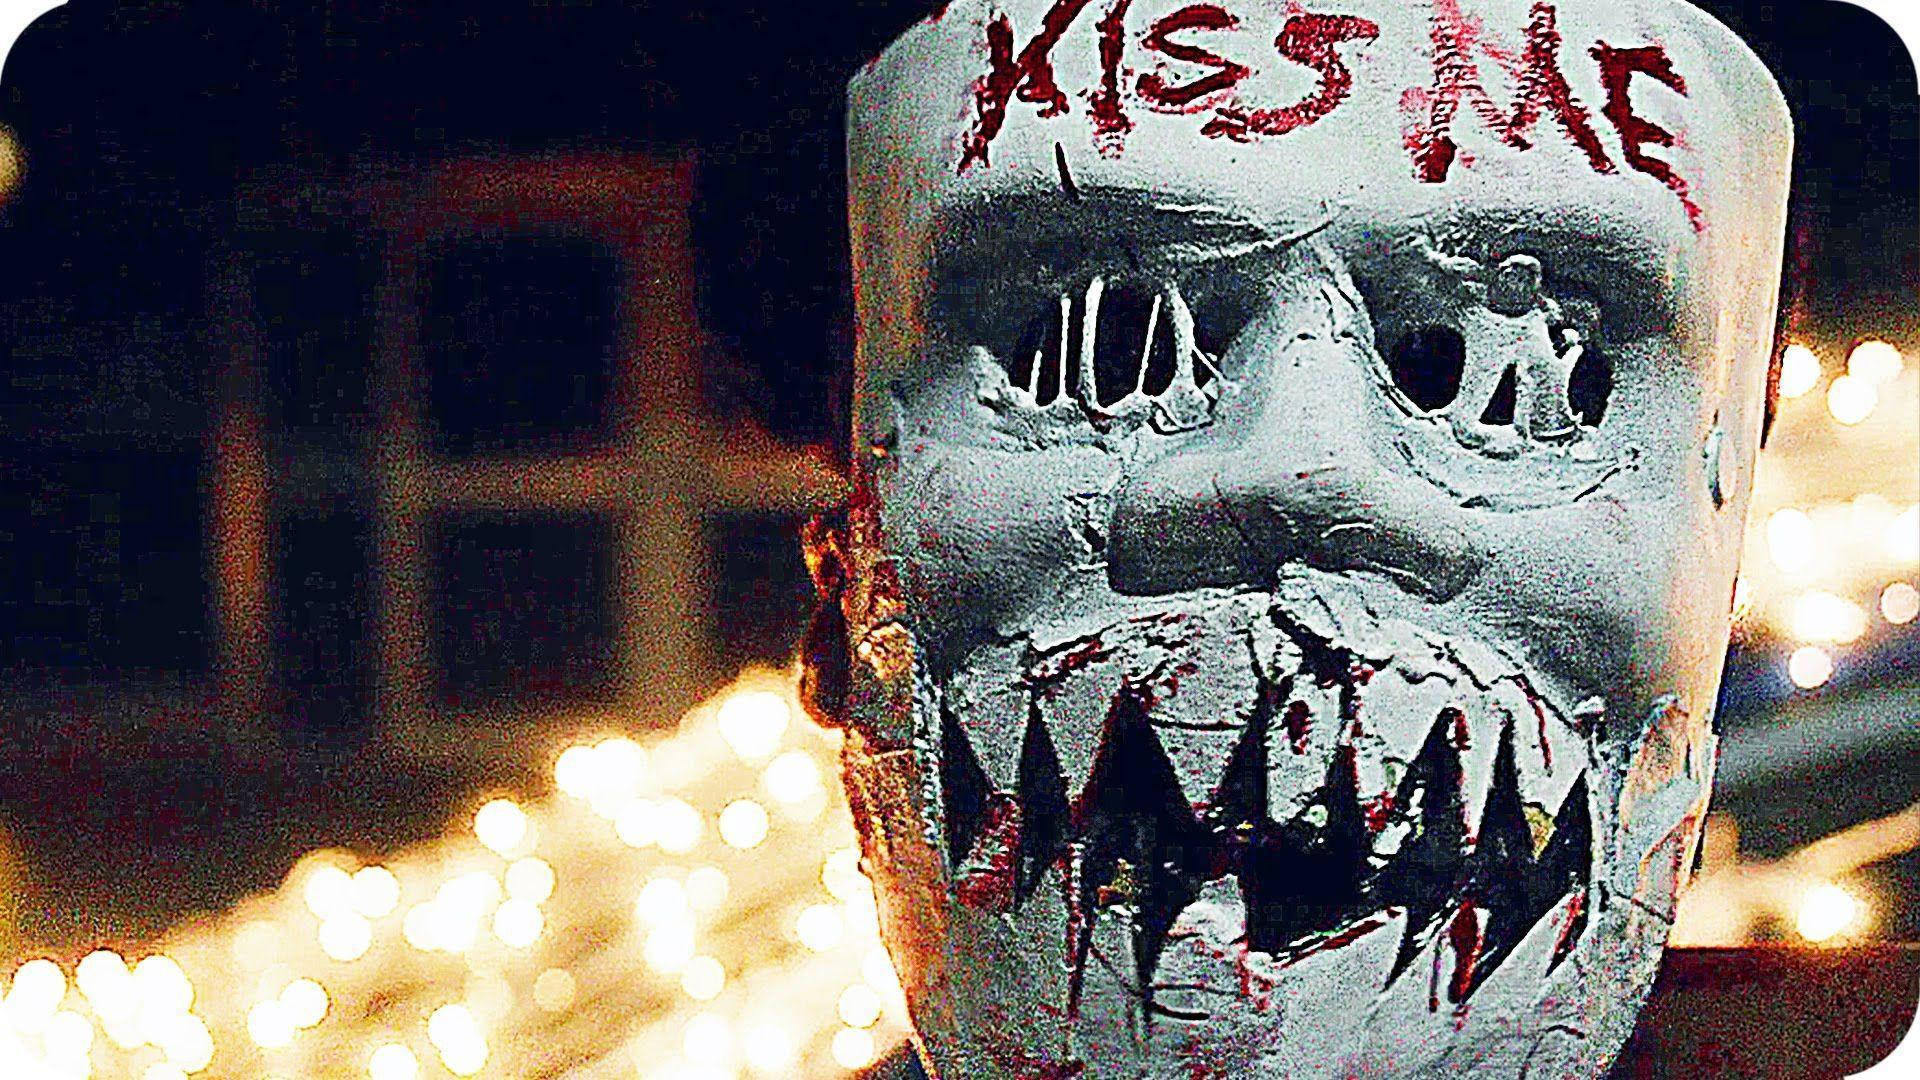 Intense Moment from The Purge Showcasing the Infamous 'Kiss Me' Mask Wallpaper